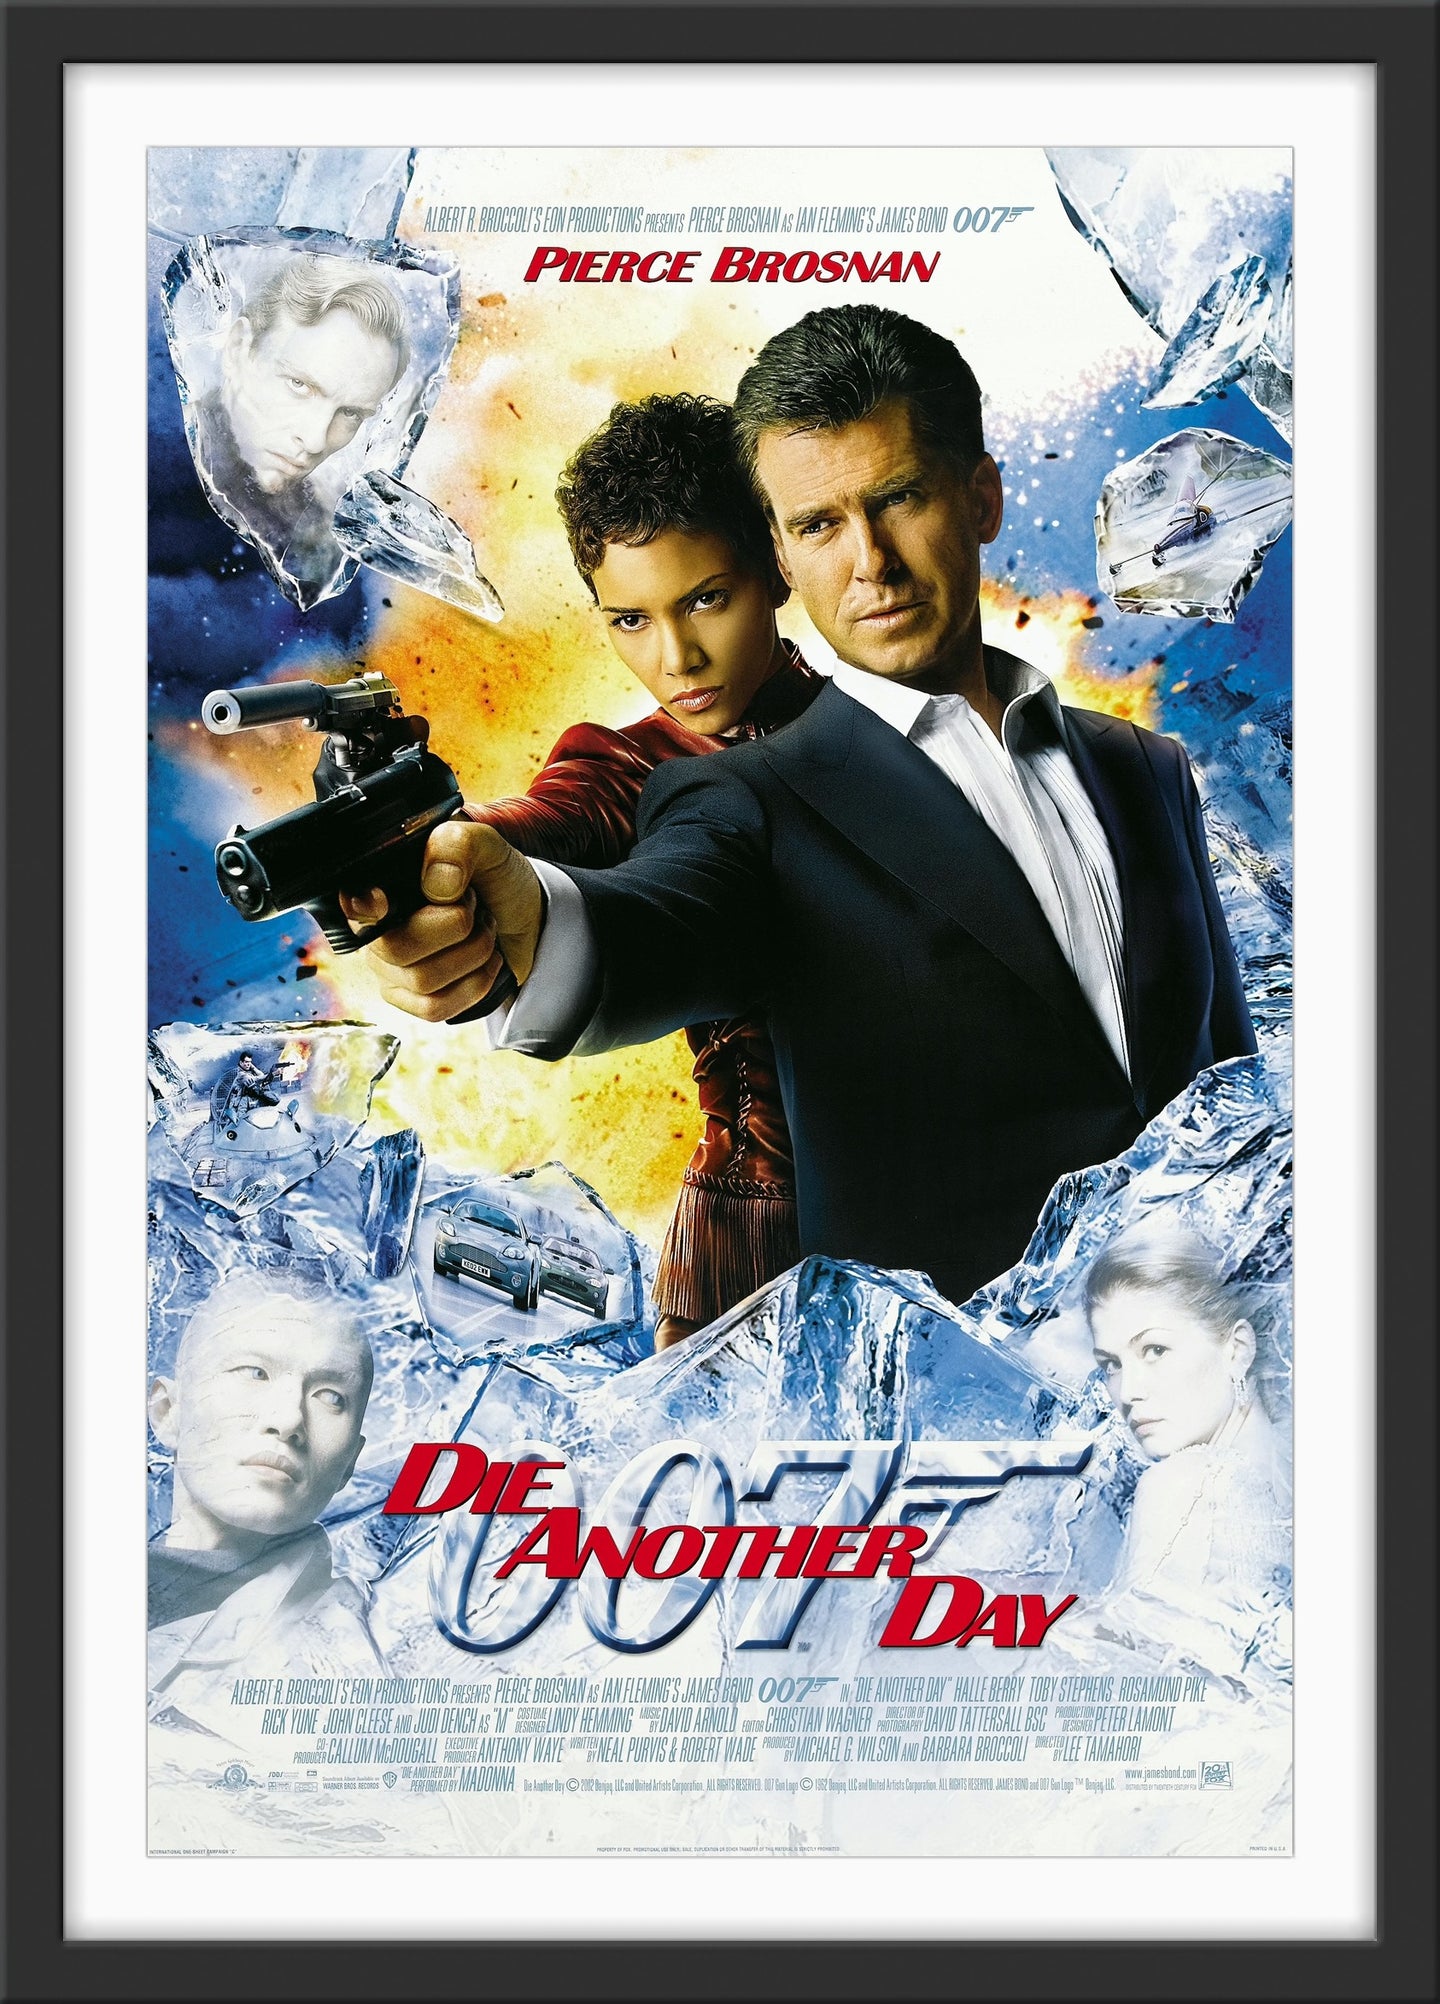 An original movie poster for the James Bond film Die Another Day